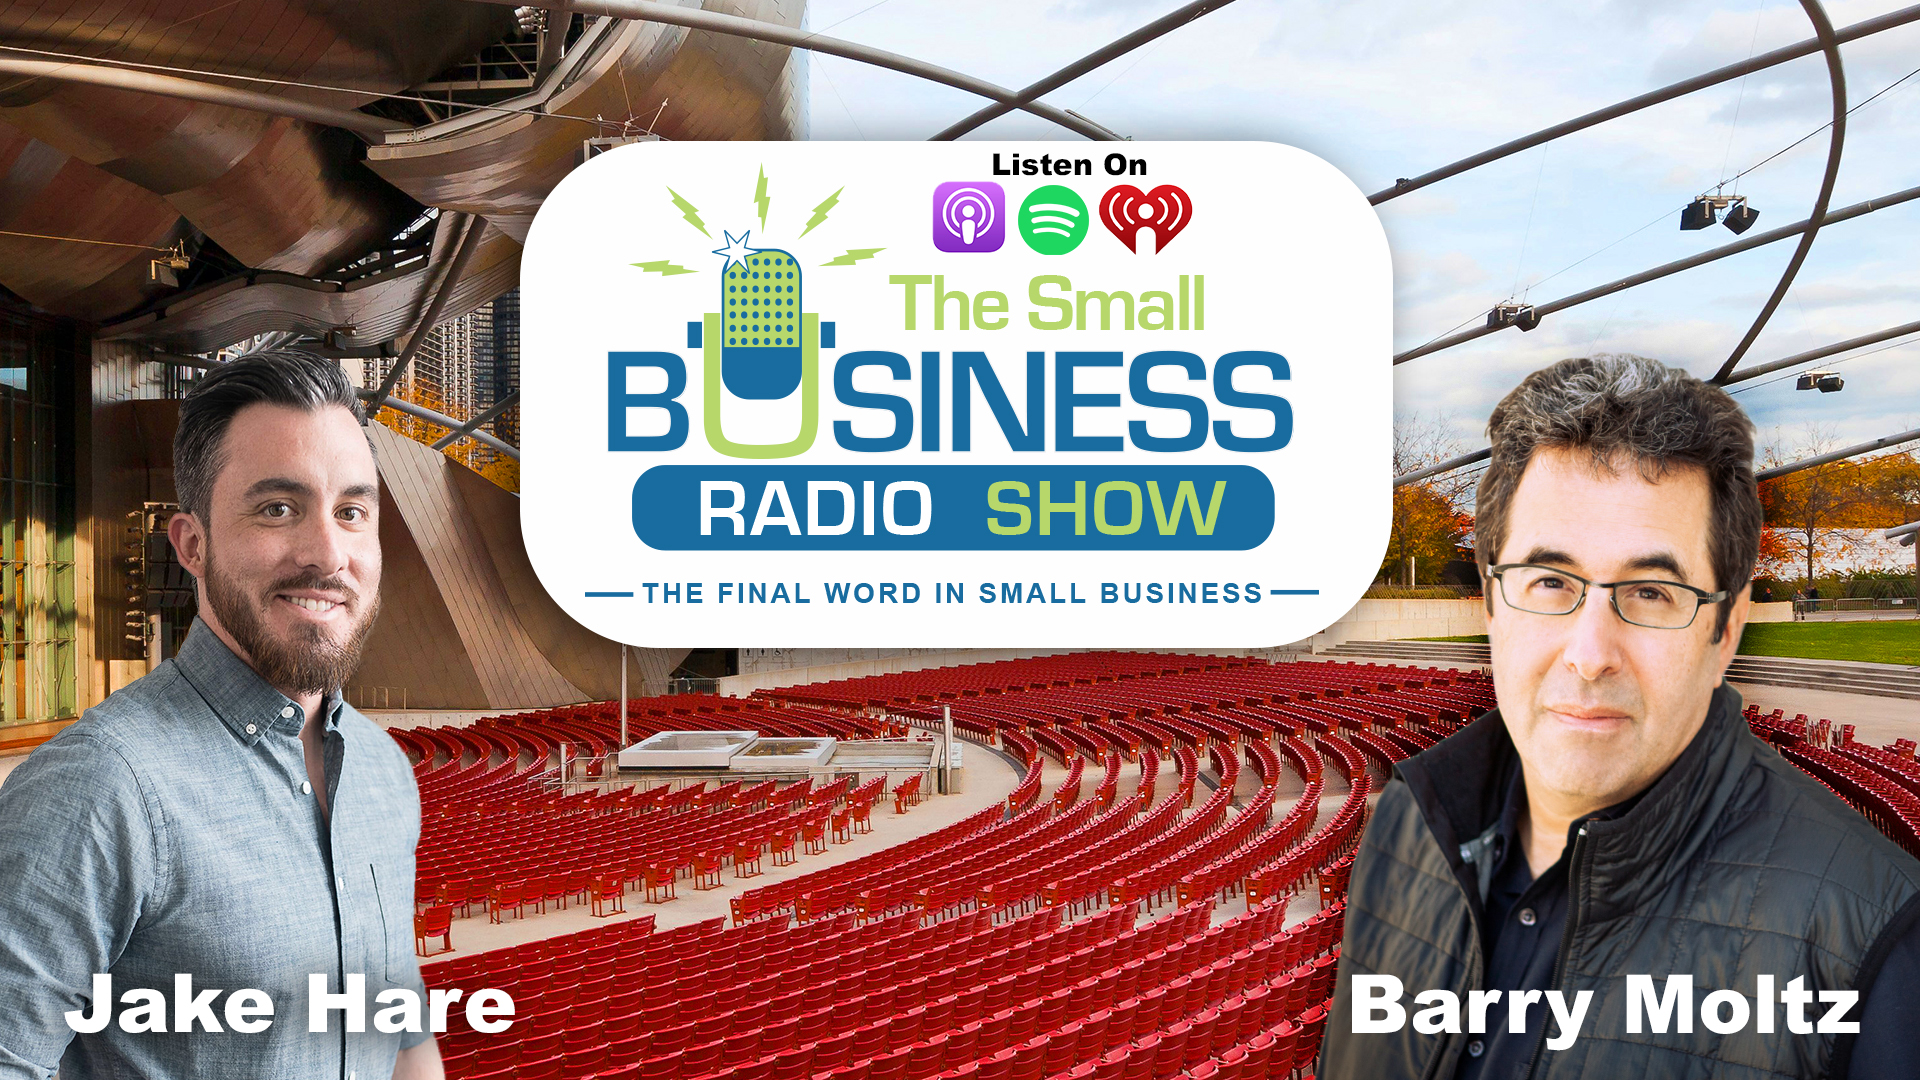 Jake Hare on The Small Business Radio Show